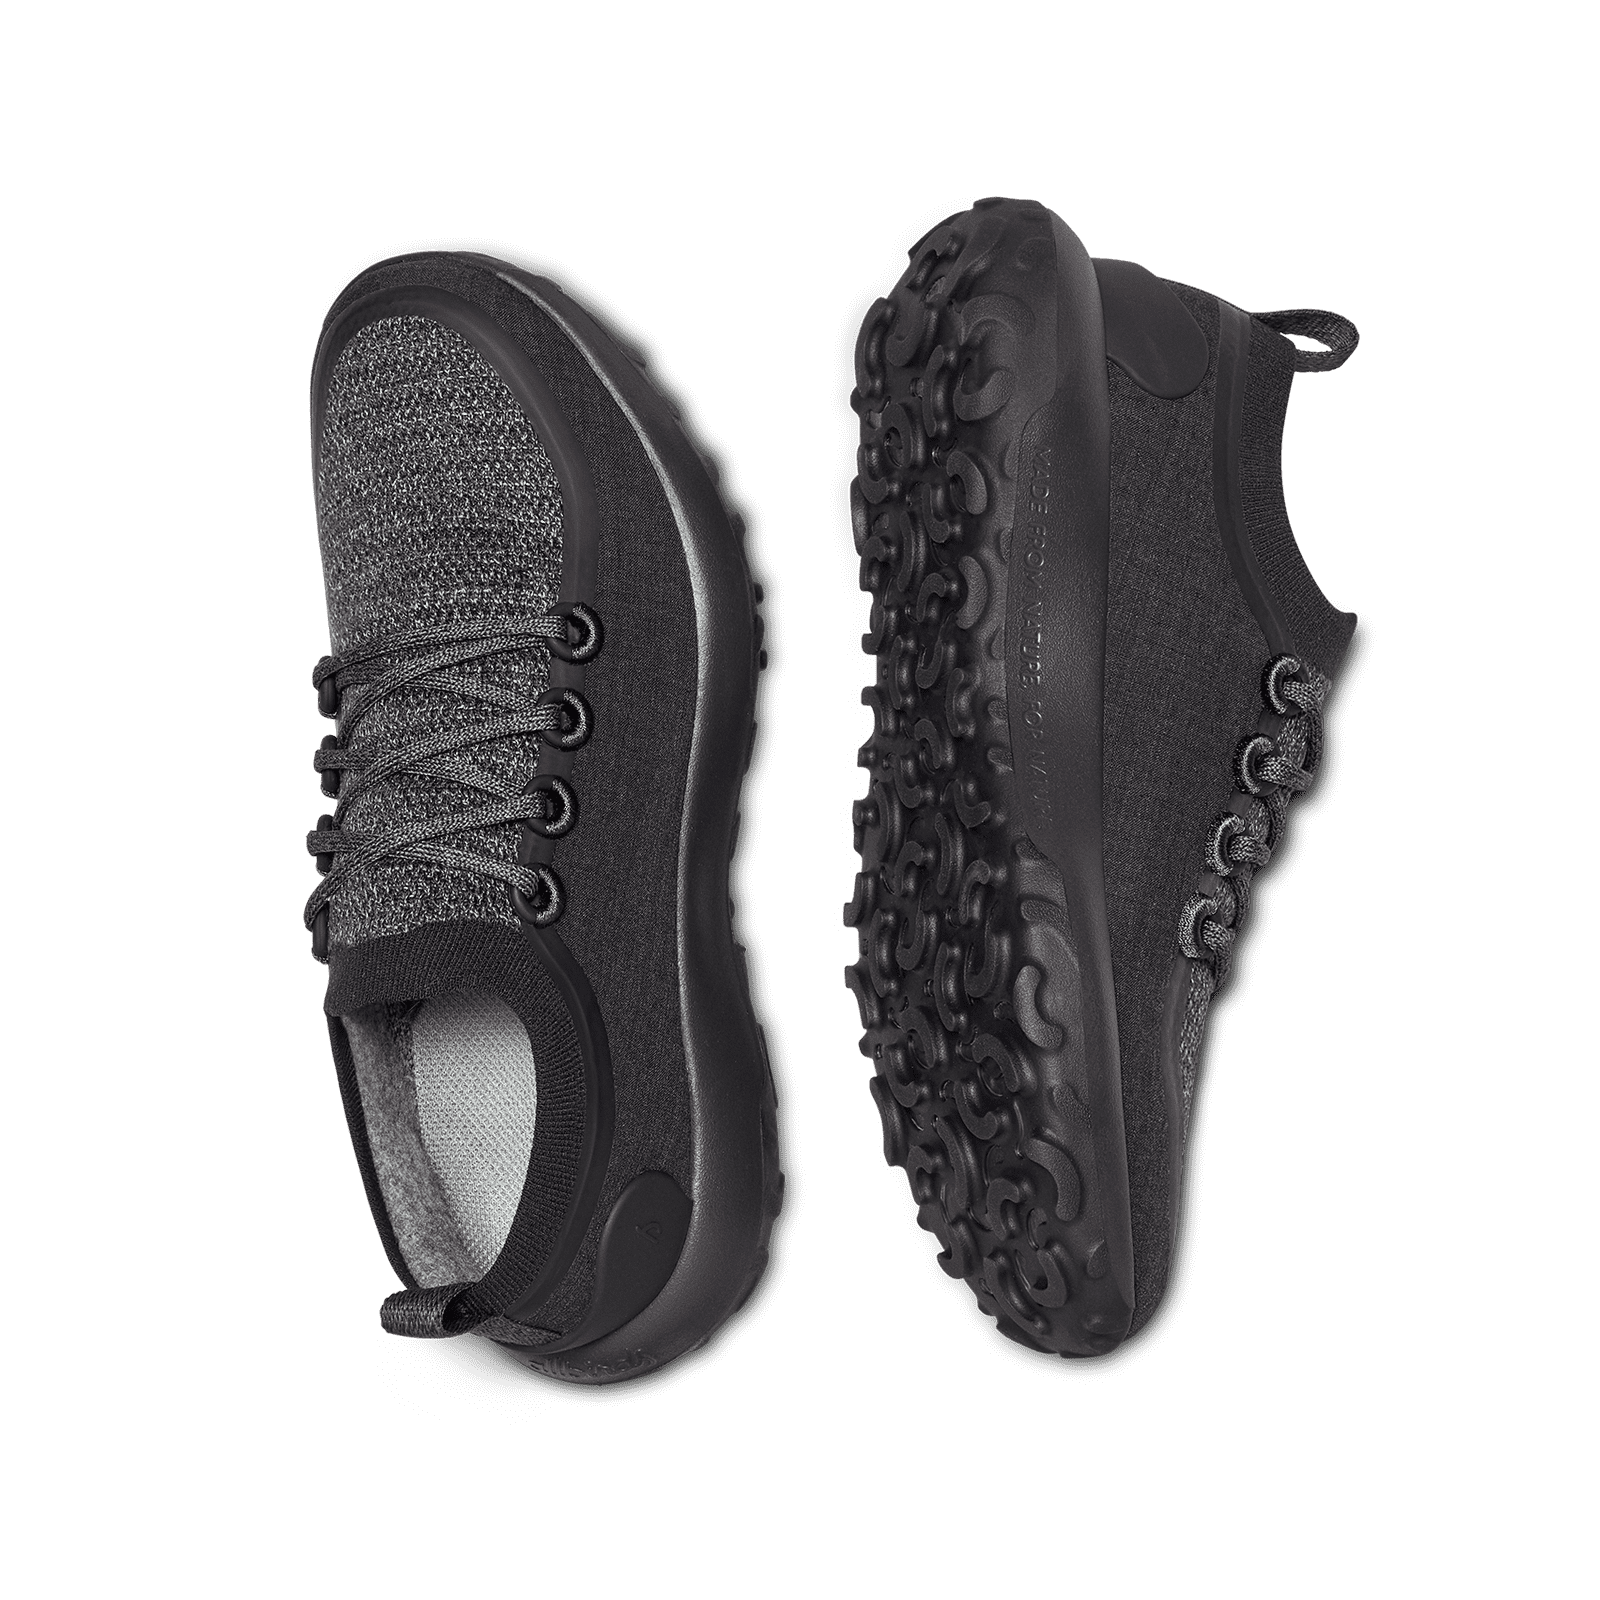 Women's Trail Runners SWT - Natural Black (Black Sole)